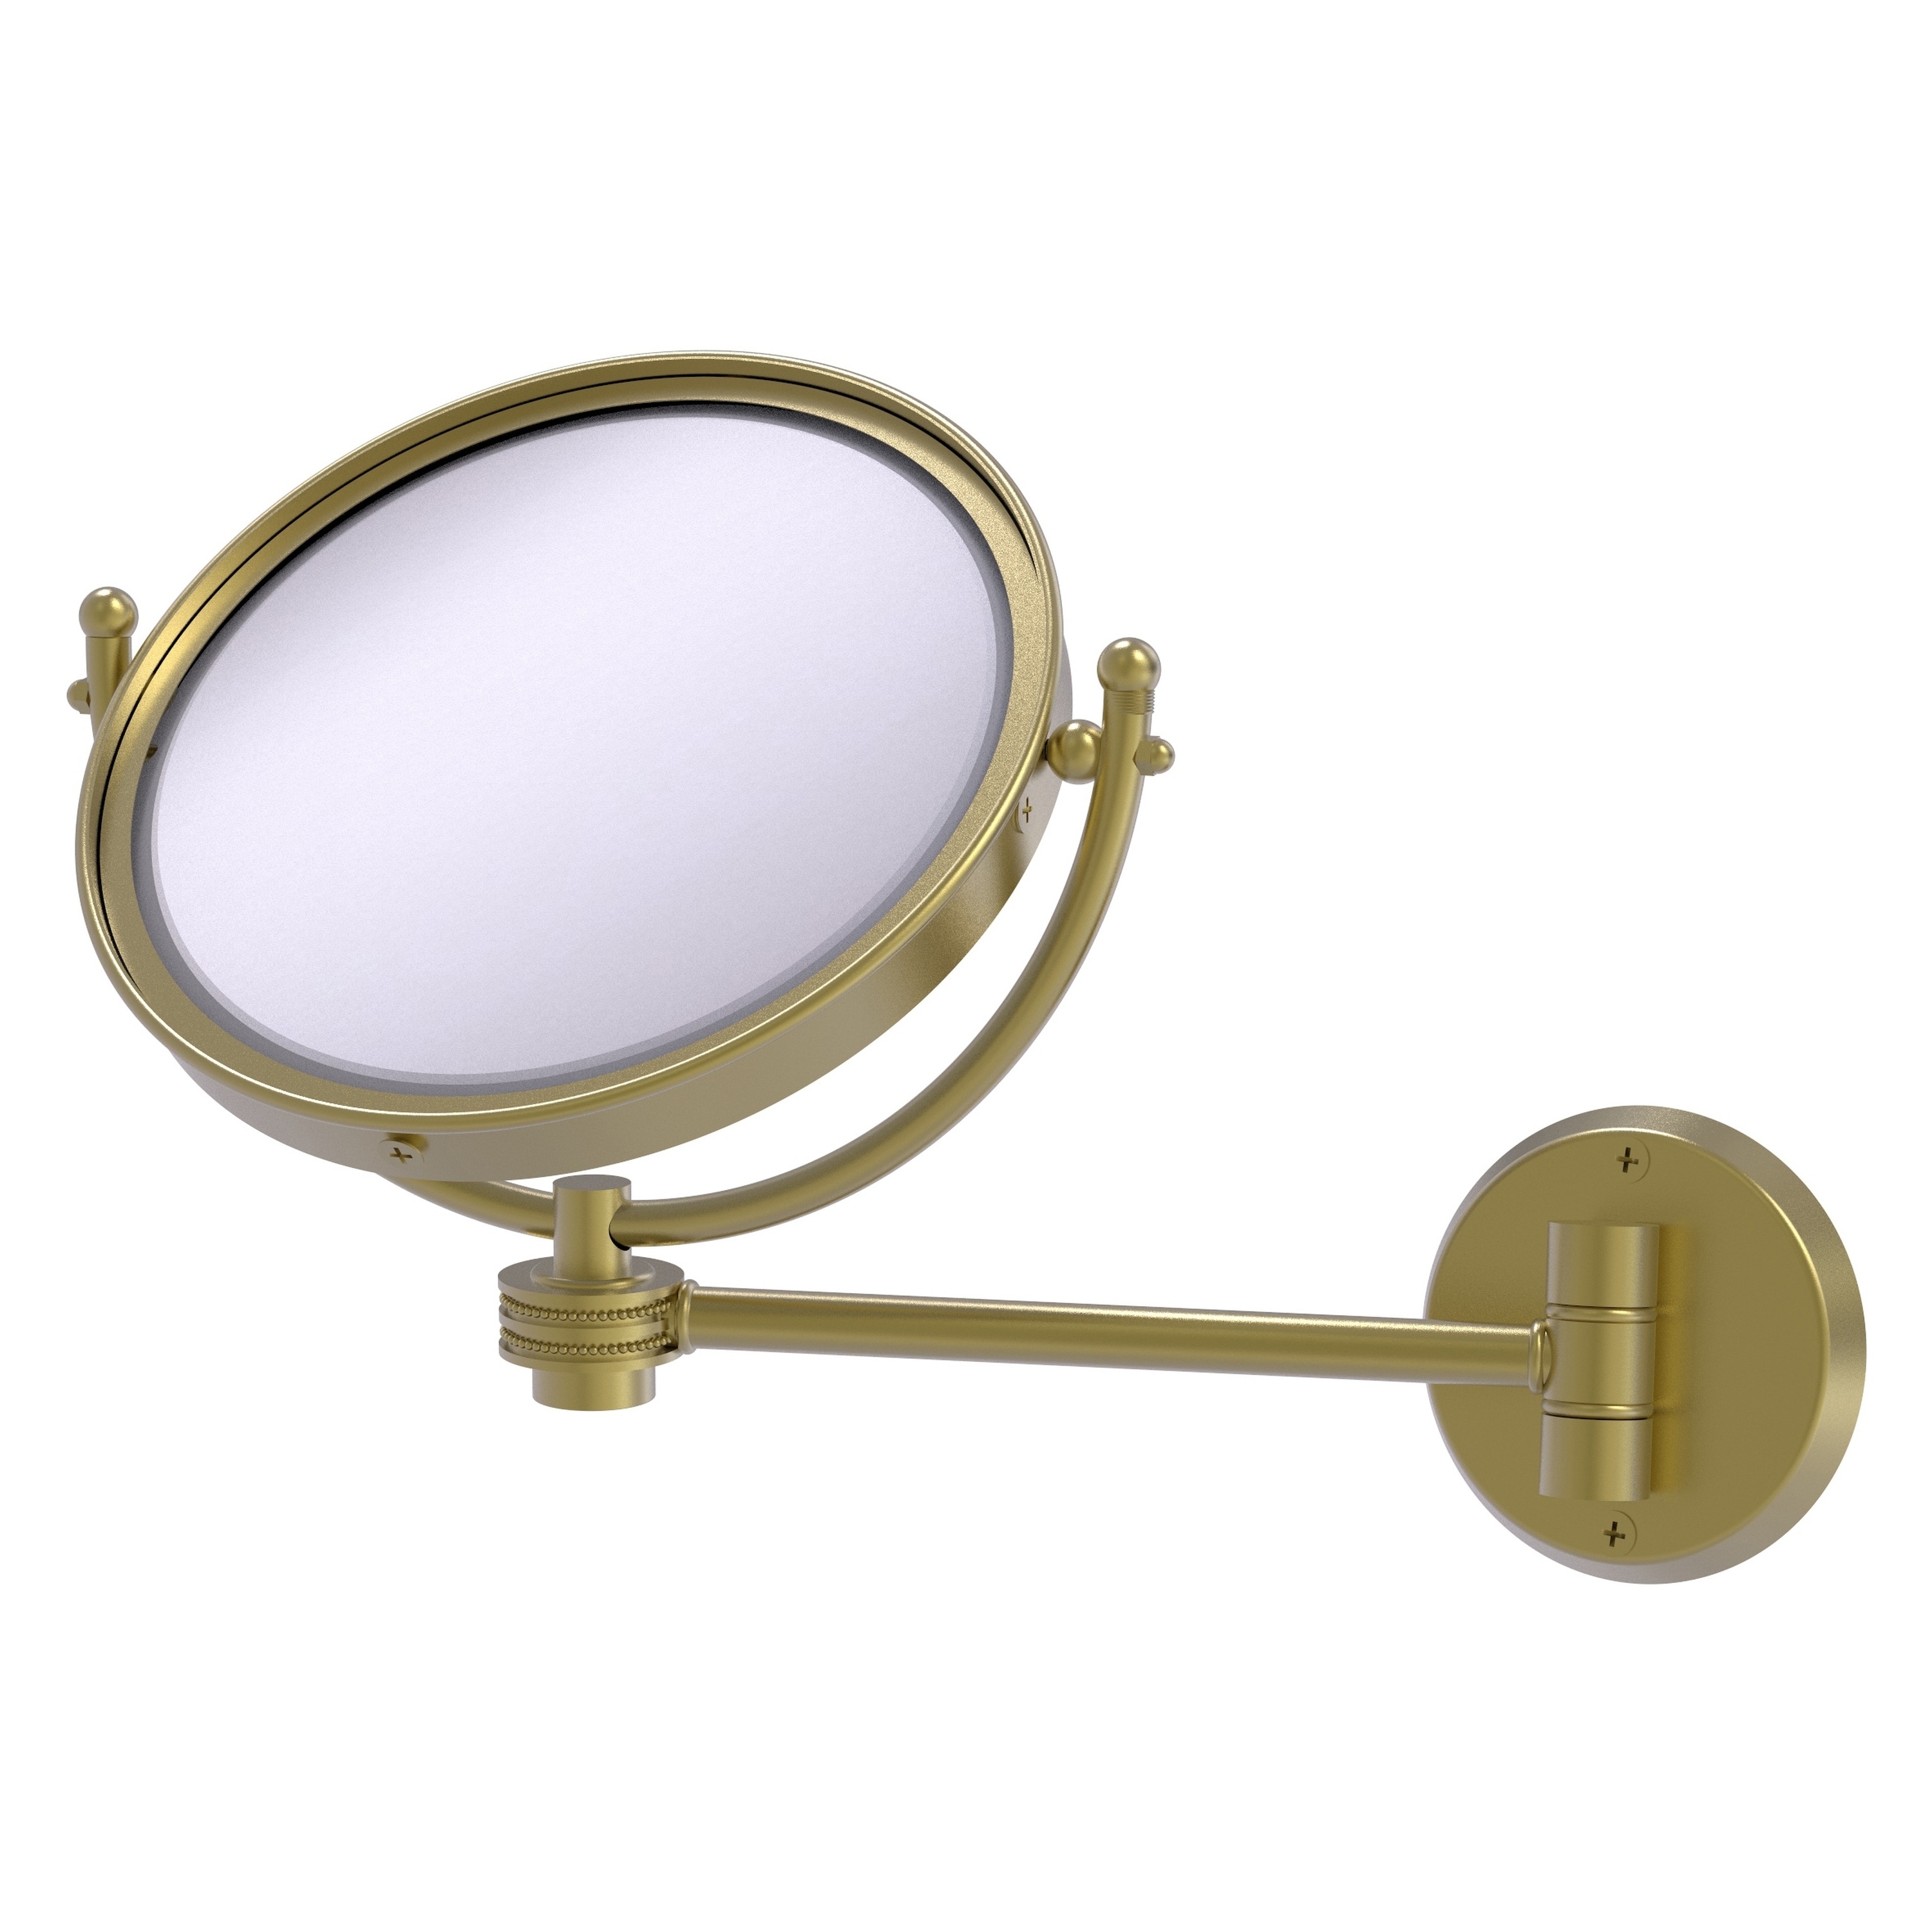 8-in x 10-in Satin Chrome Double-sided 5X Magnifying Wall-mounted Vanity Mirror | - Allied Brass WM-5D/4X-SBR